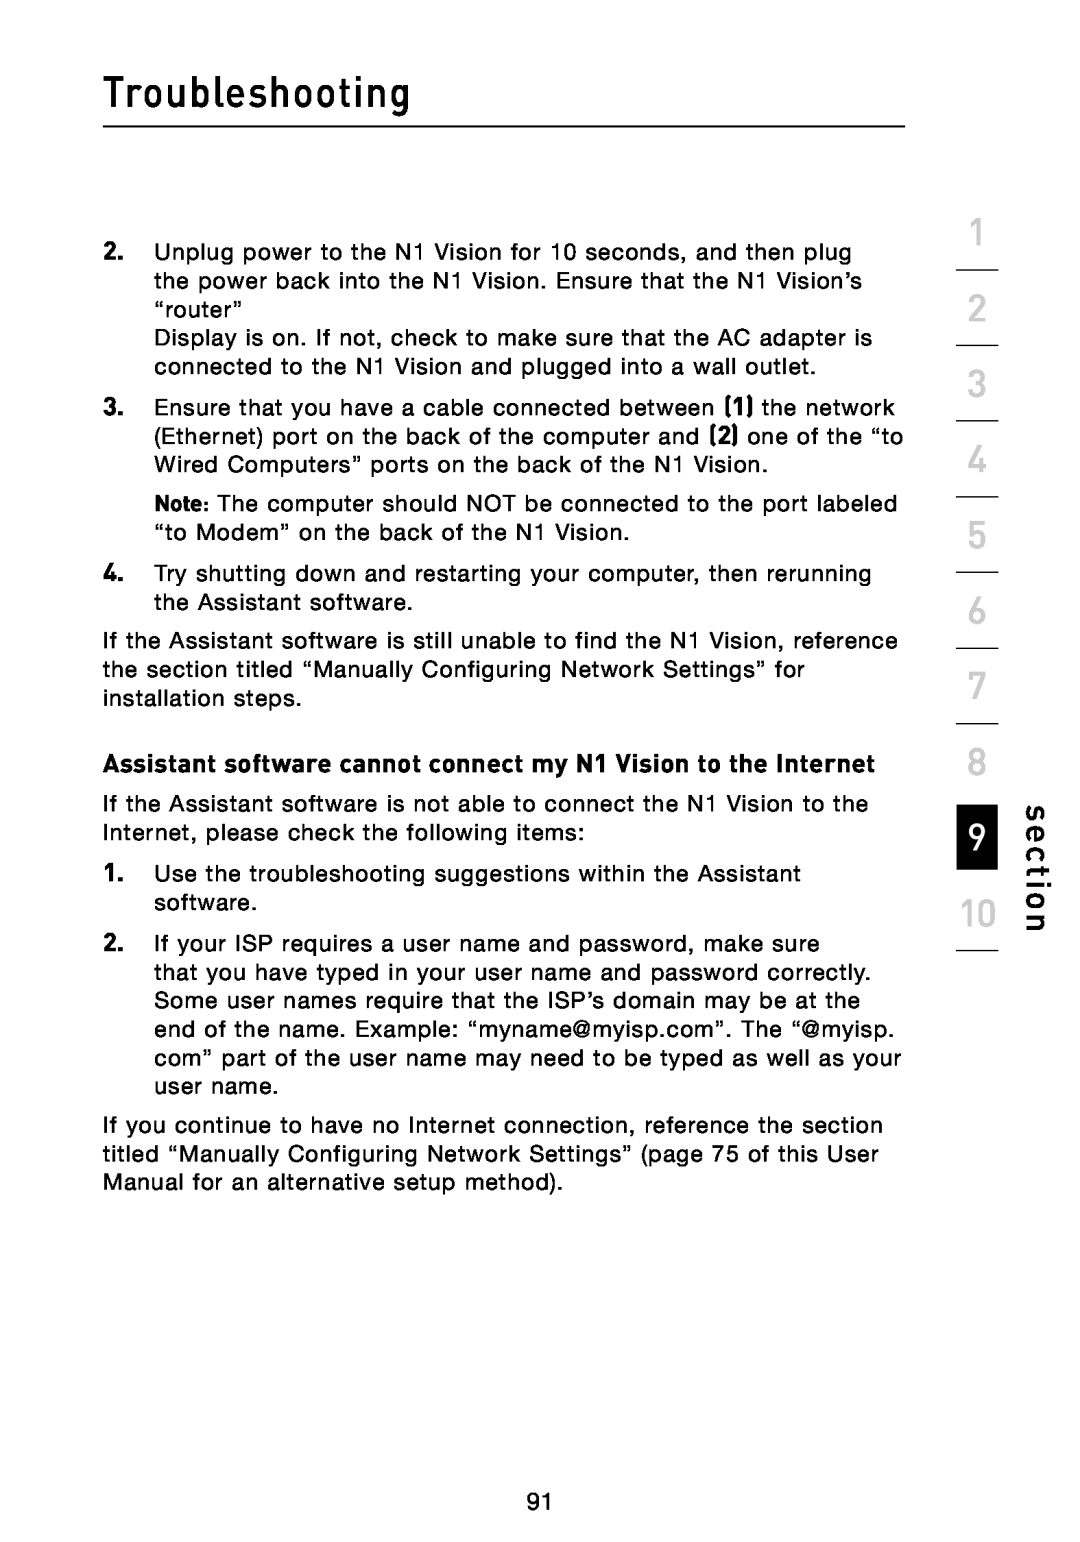 Belkin user manual Assistant software cannot connect my N1 Vision to the Internet, Troubleshooting, section 